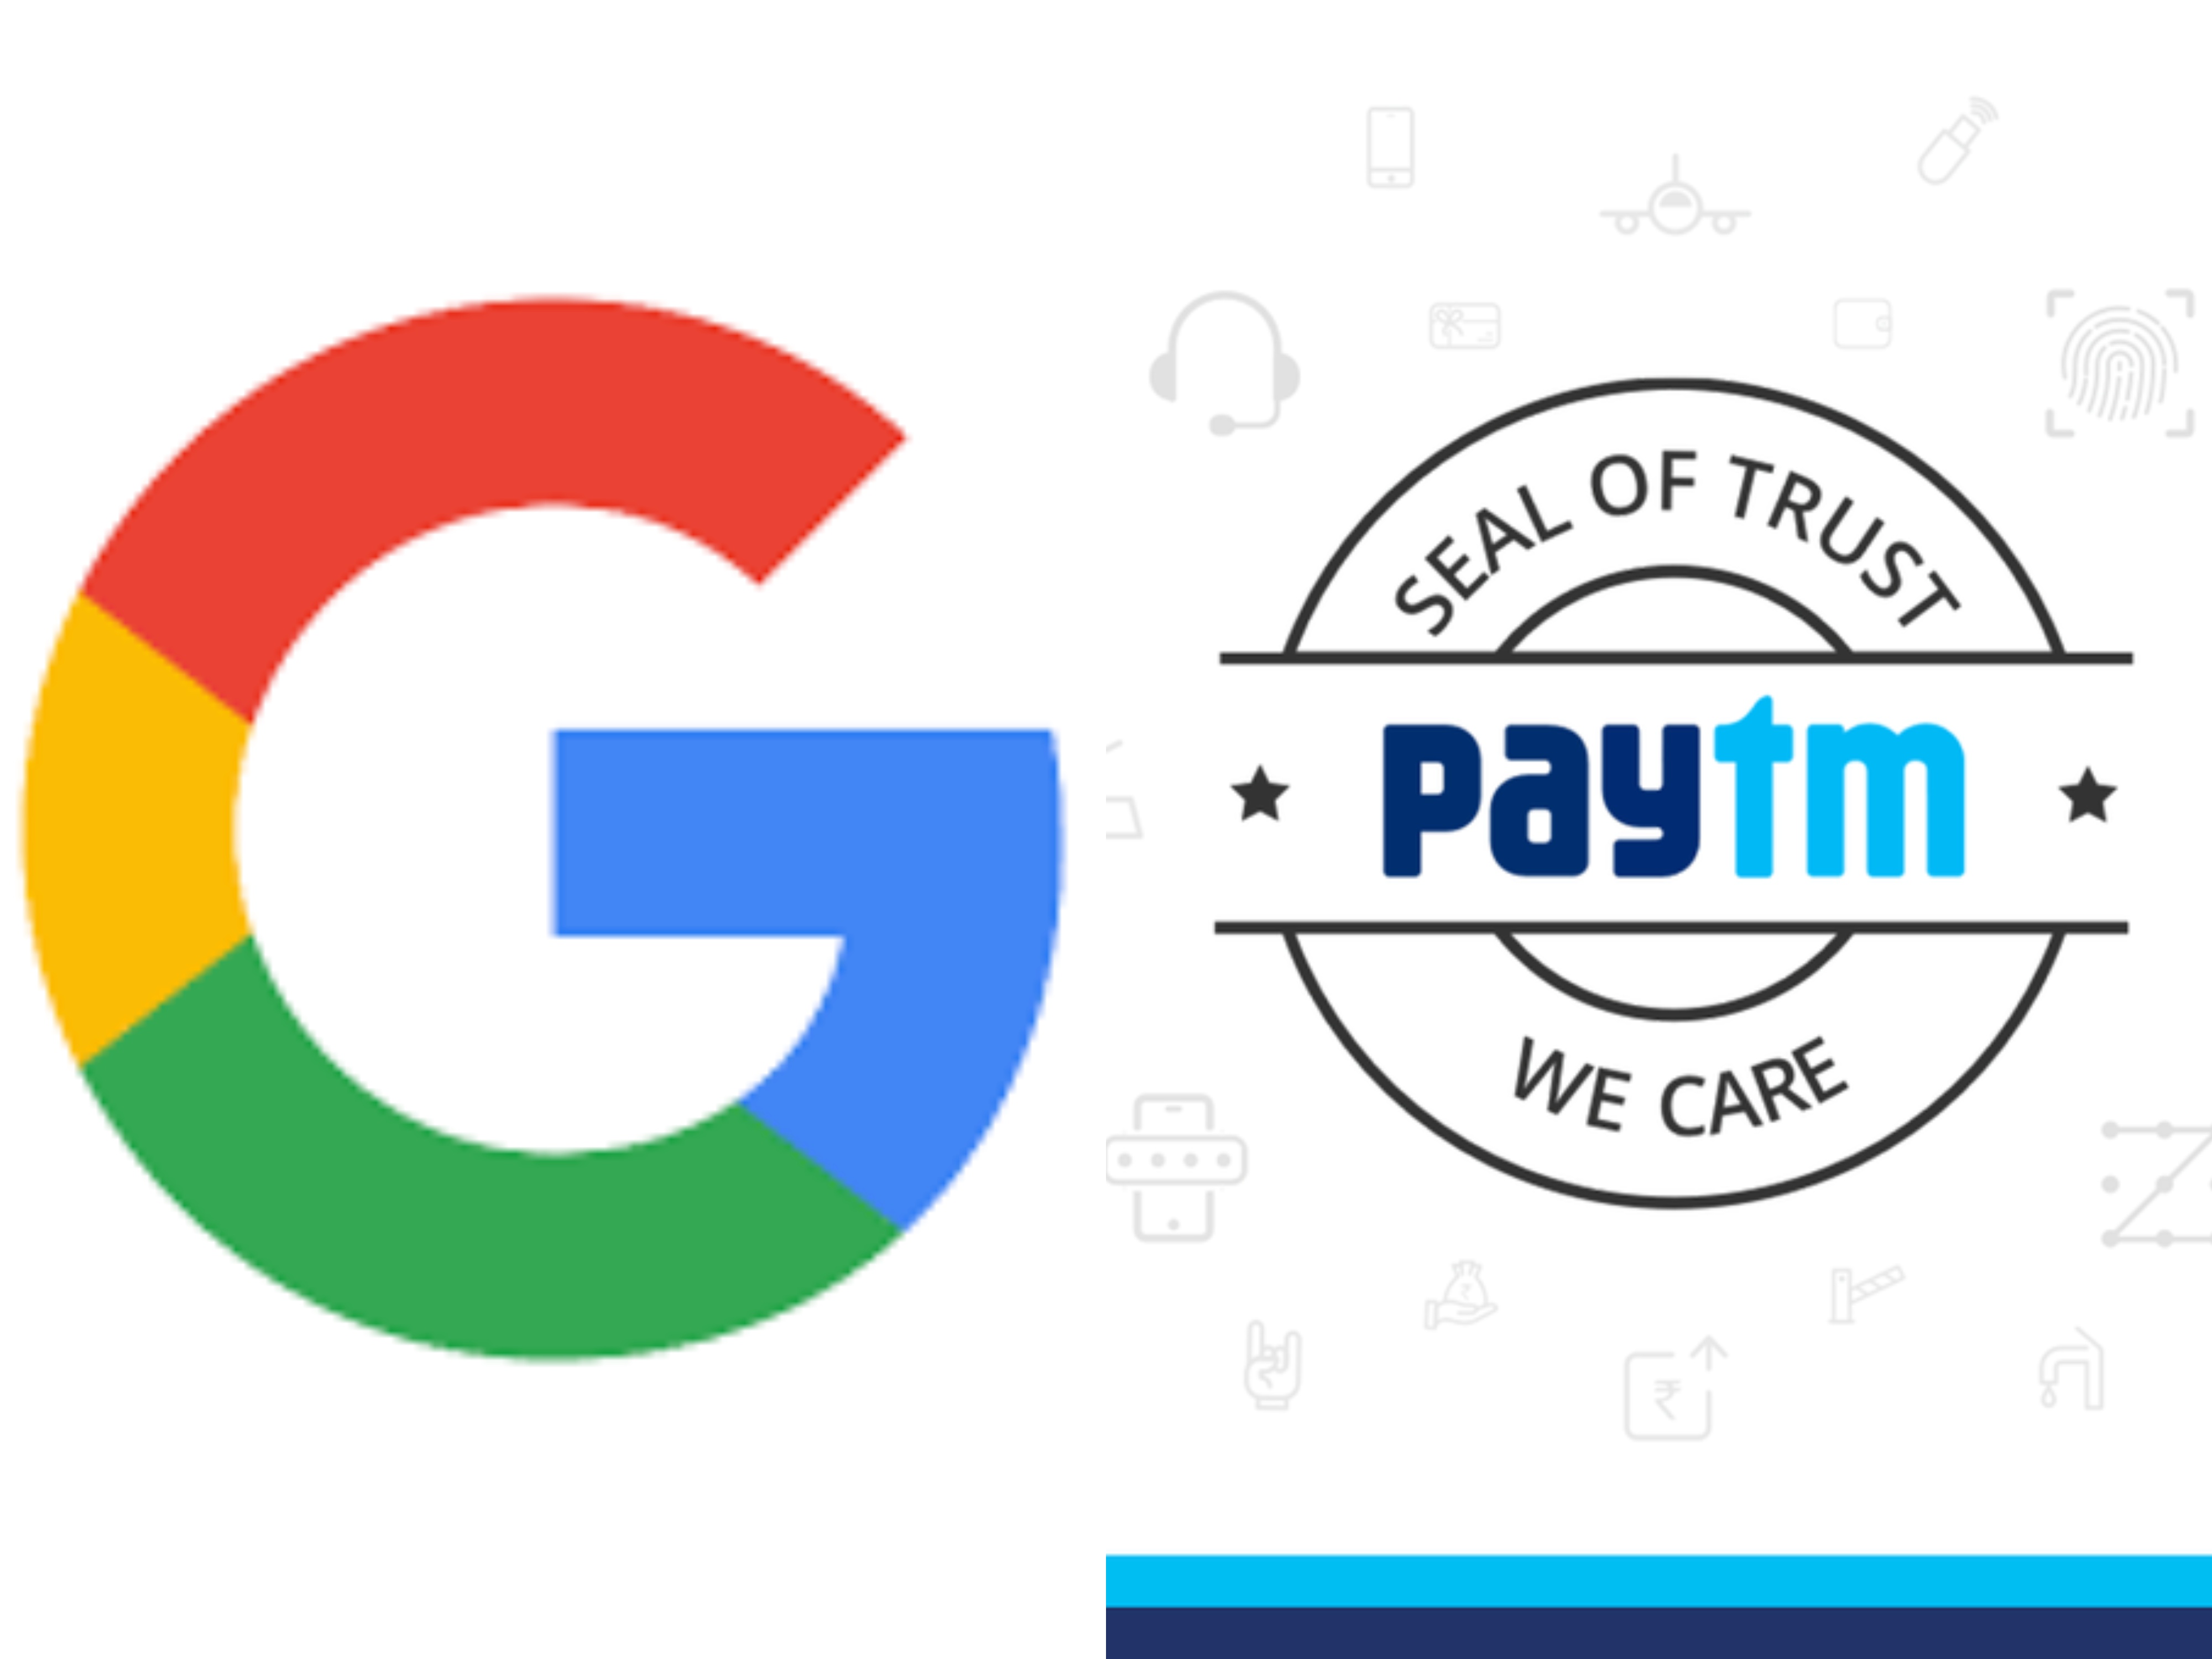 IPL2020: Paytm gets removed from playstore by Google ahead of the Indian Premier League